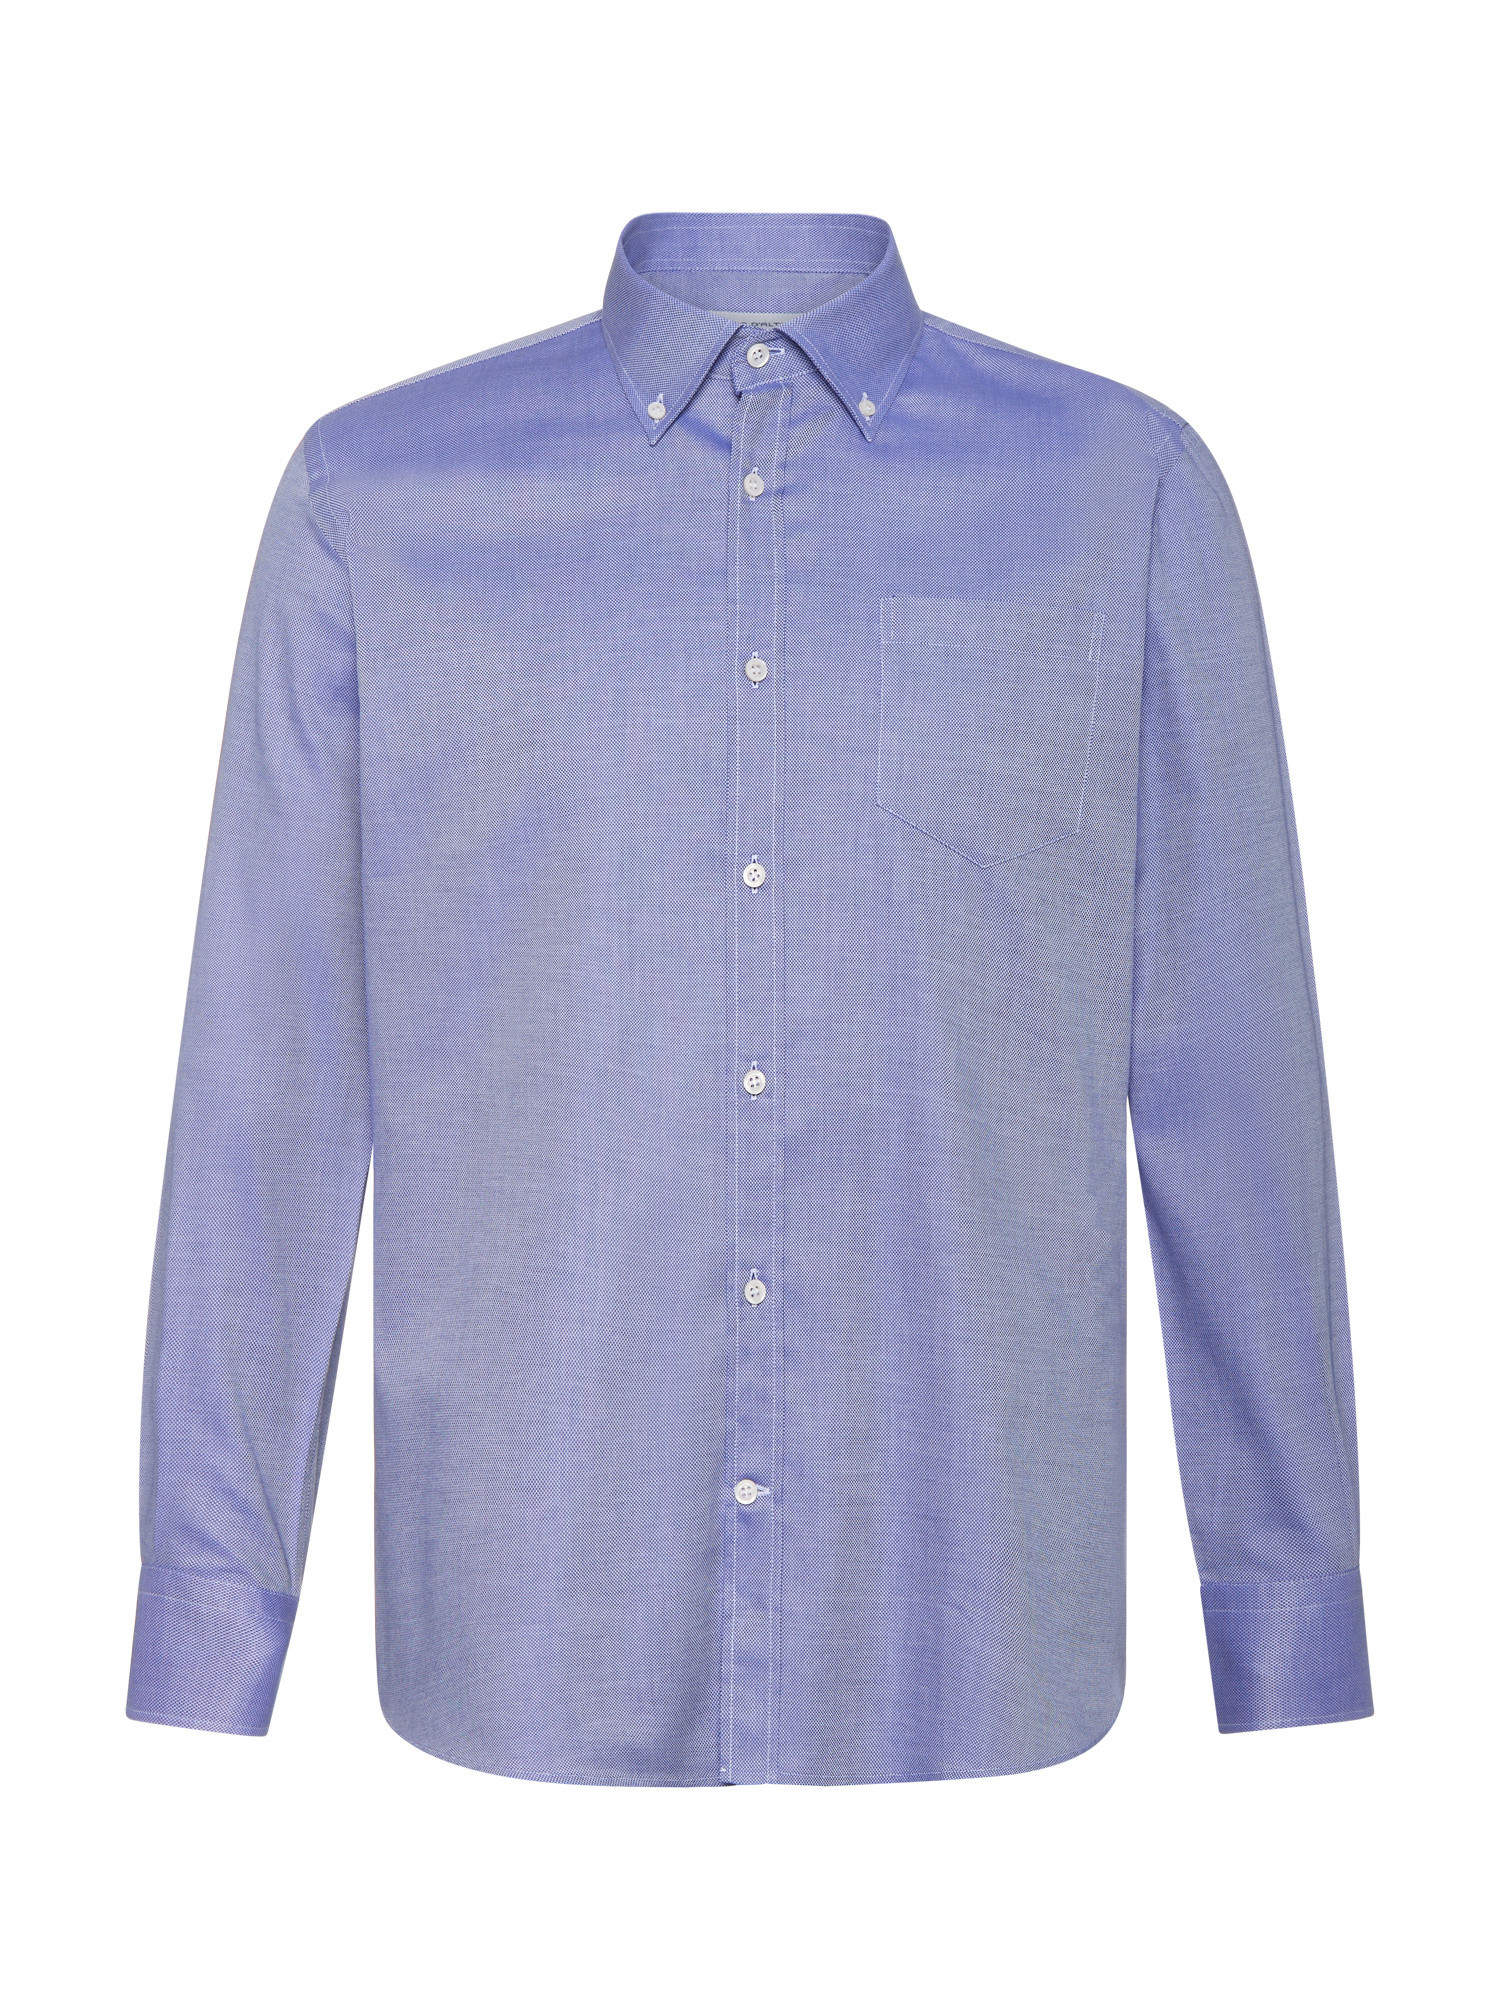 Luca D'Altieri - Regular fit chasuble shirt in pure textured cotton, Light Blue, large image number 1